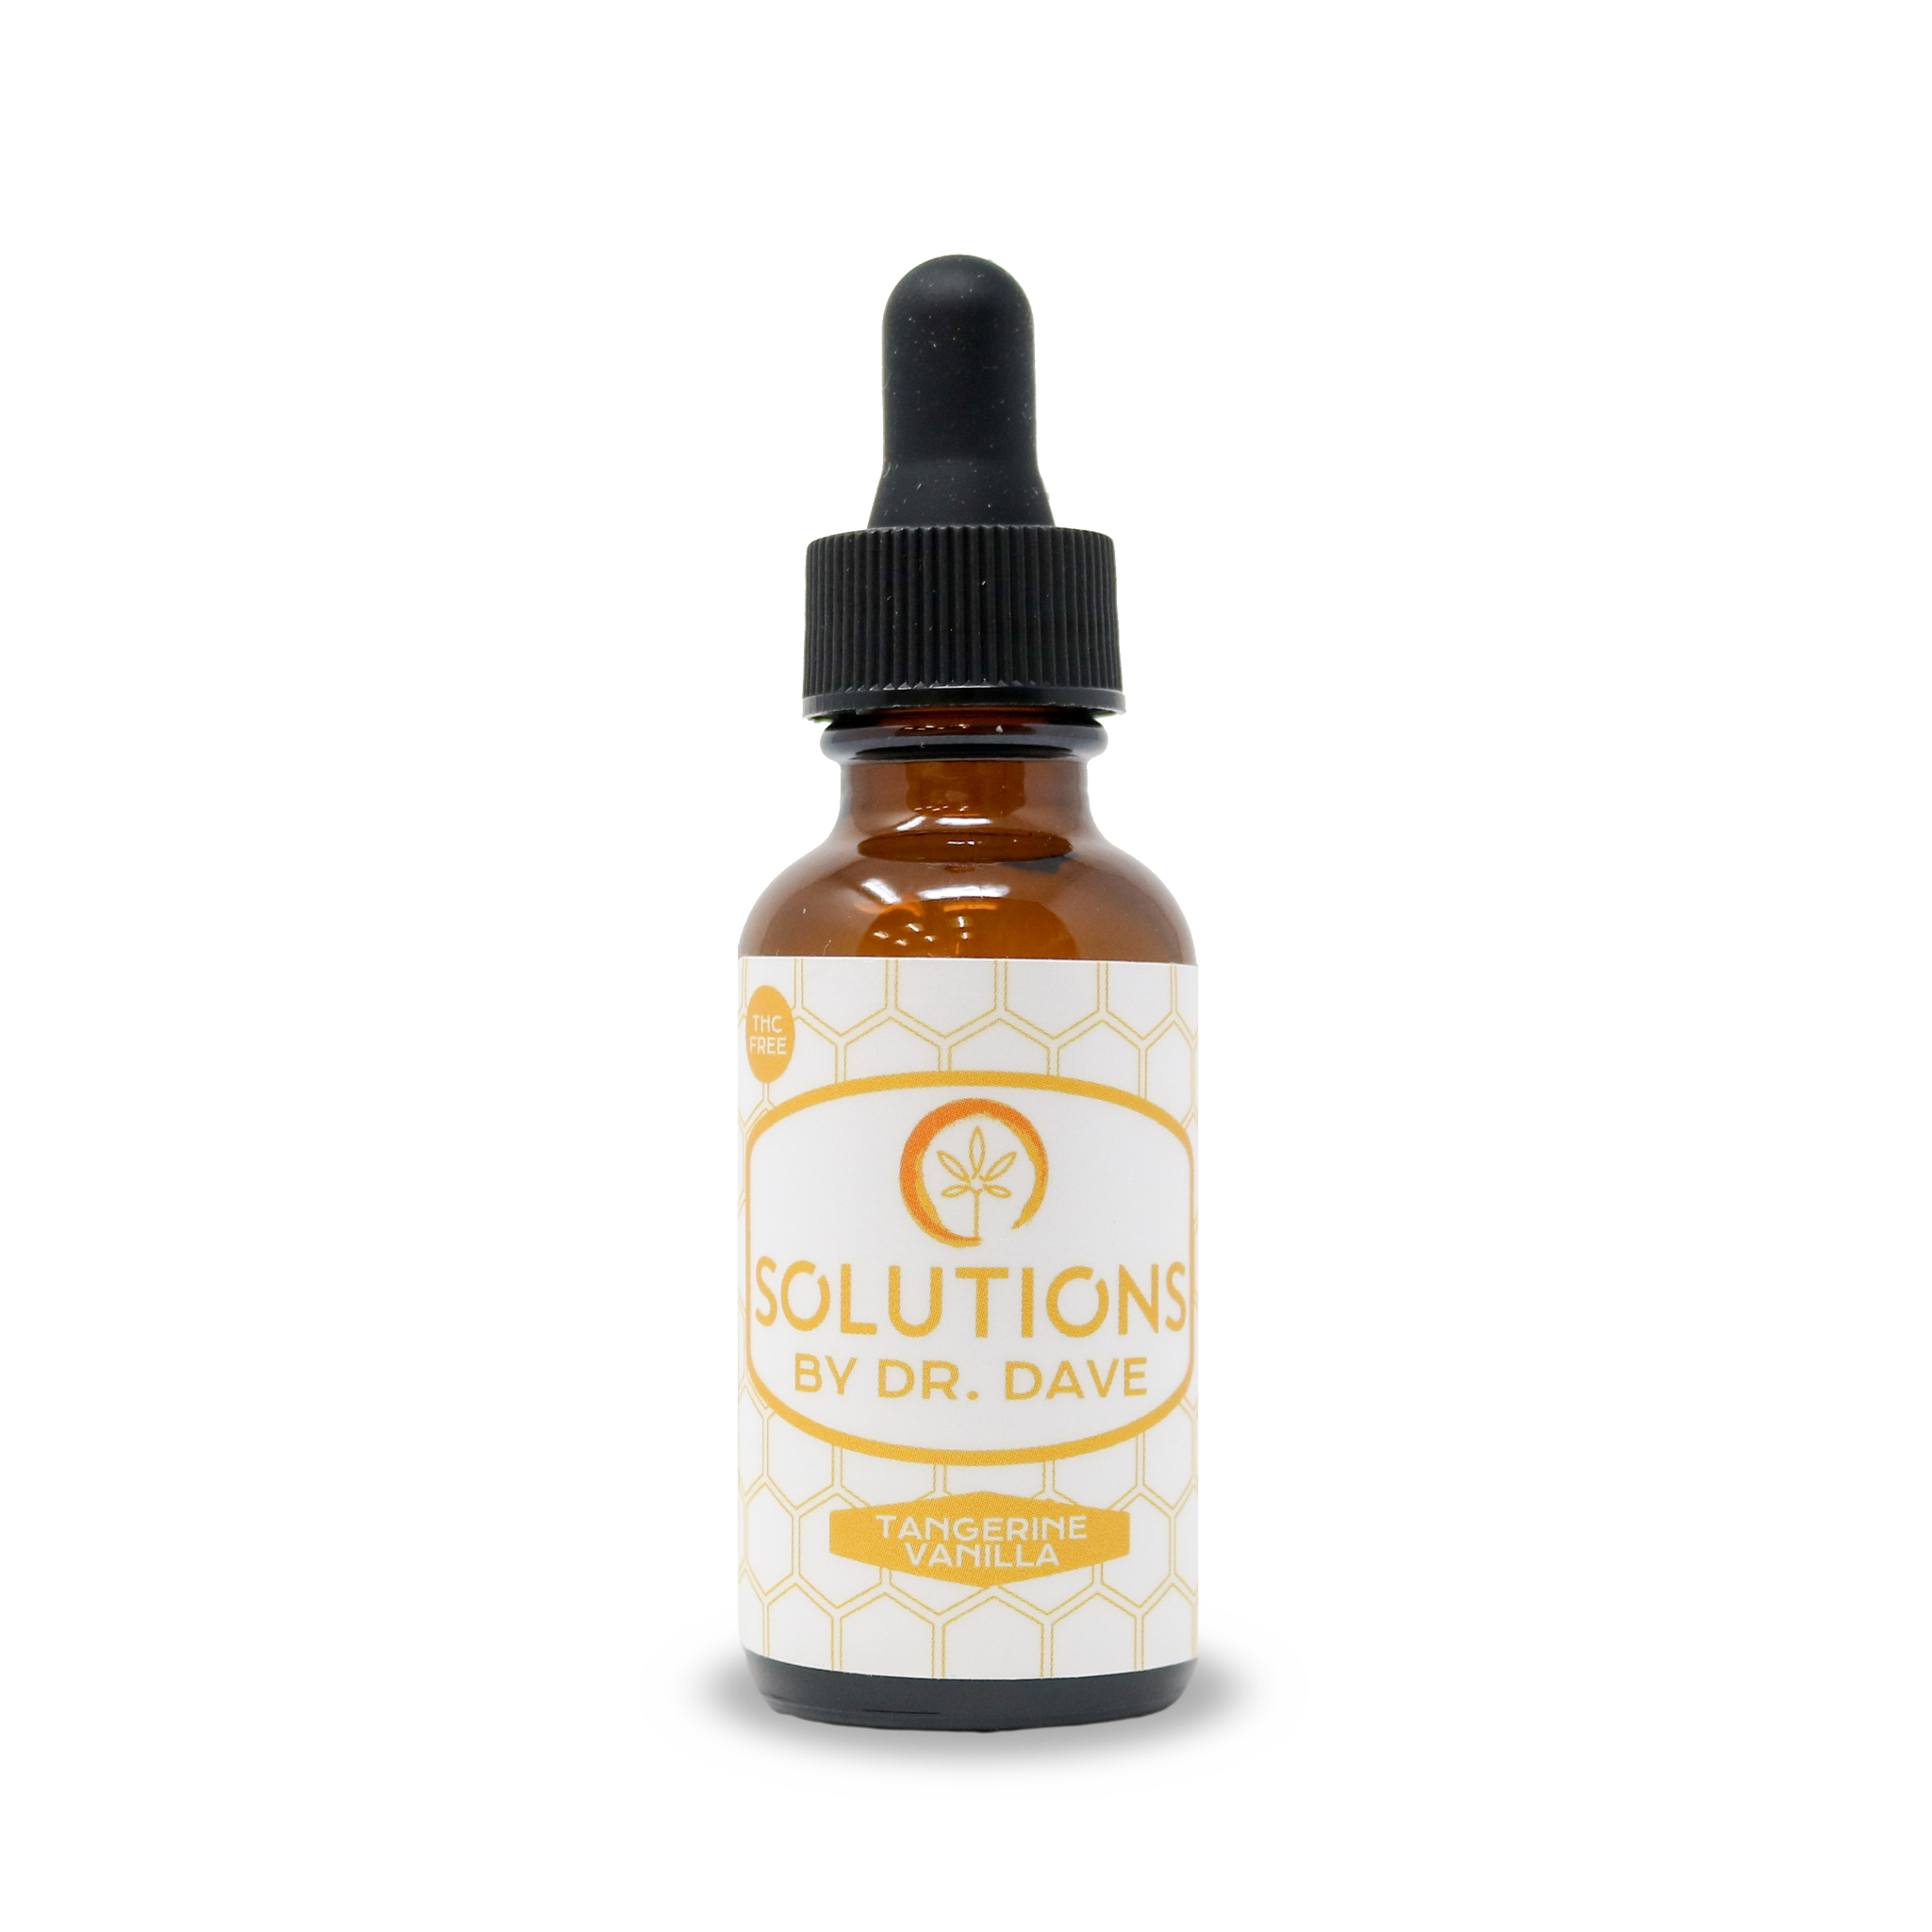 A bottle of Solutions by Doctor Dave tangerine vanilla flavored isolate C B D tincture is shown. The bottle is a brown amber color and has a white and yellow. The label has a honey comb print and says Solutions by doctor Dave tangerine vanilla, T H C free. 